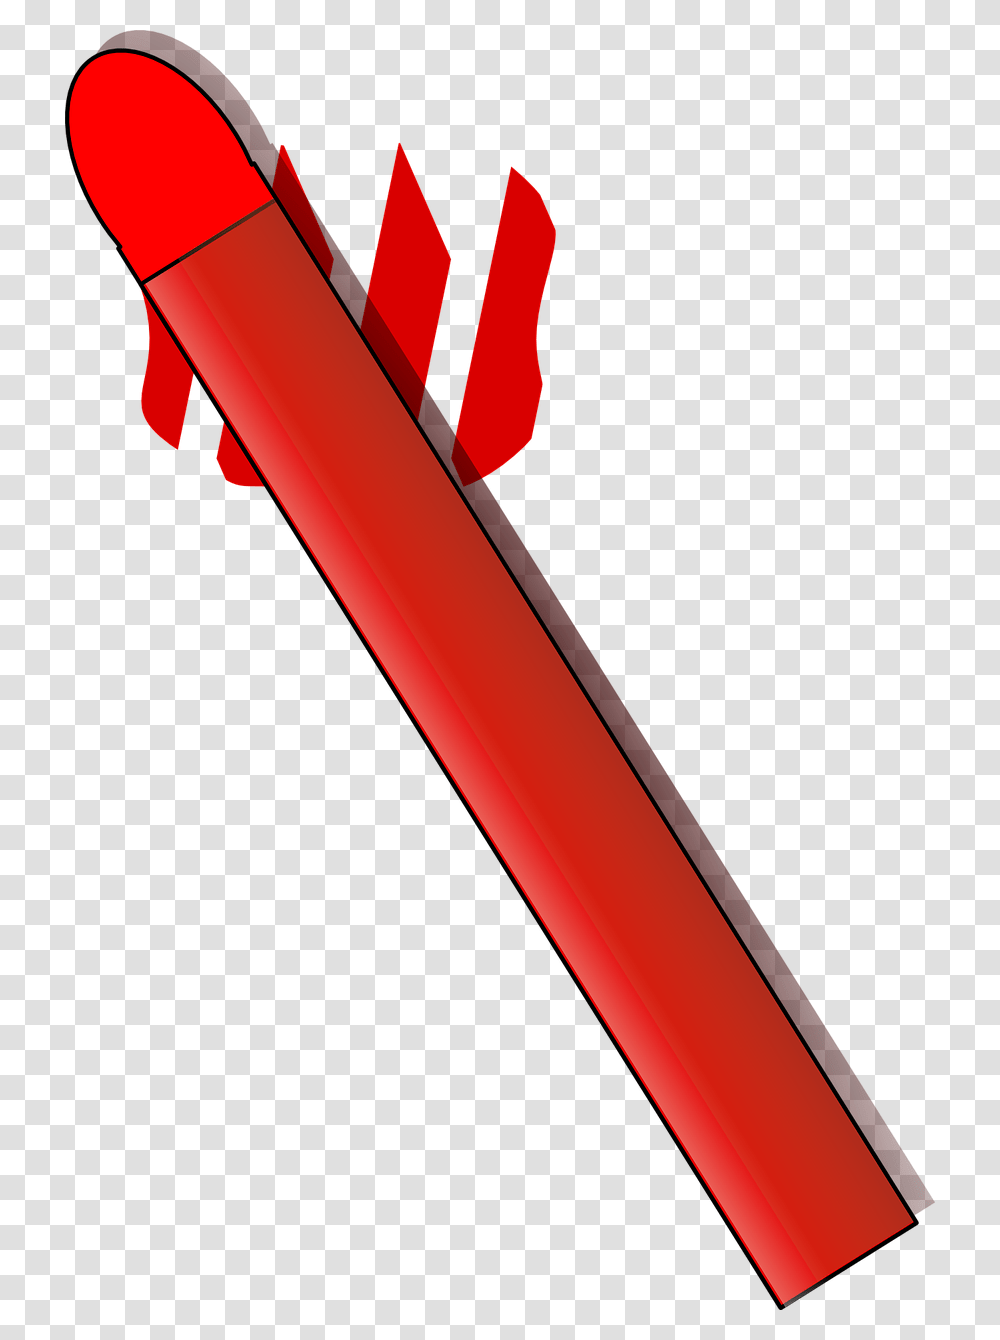 Crayon Rojo, Bomb, Weapon, Weaponry, Dynamite Transparent Png